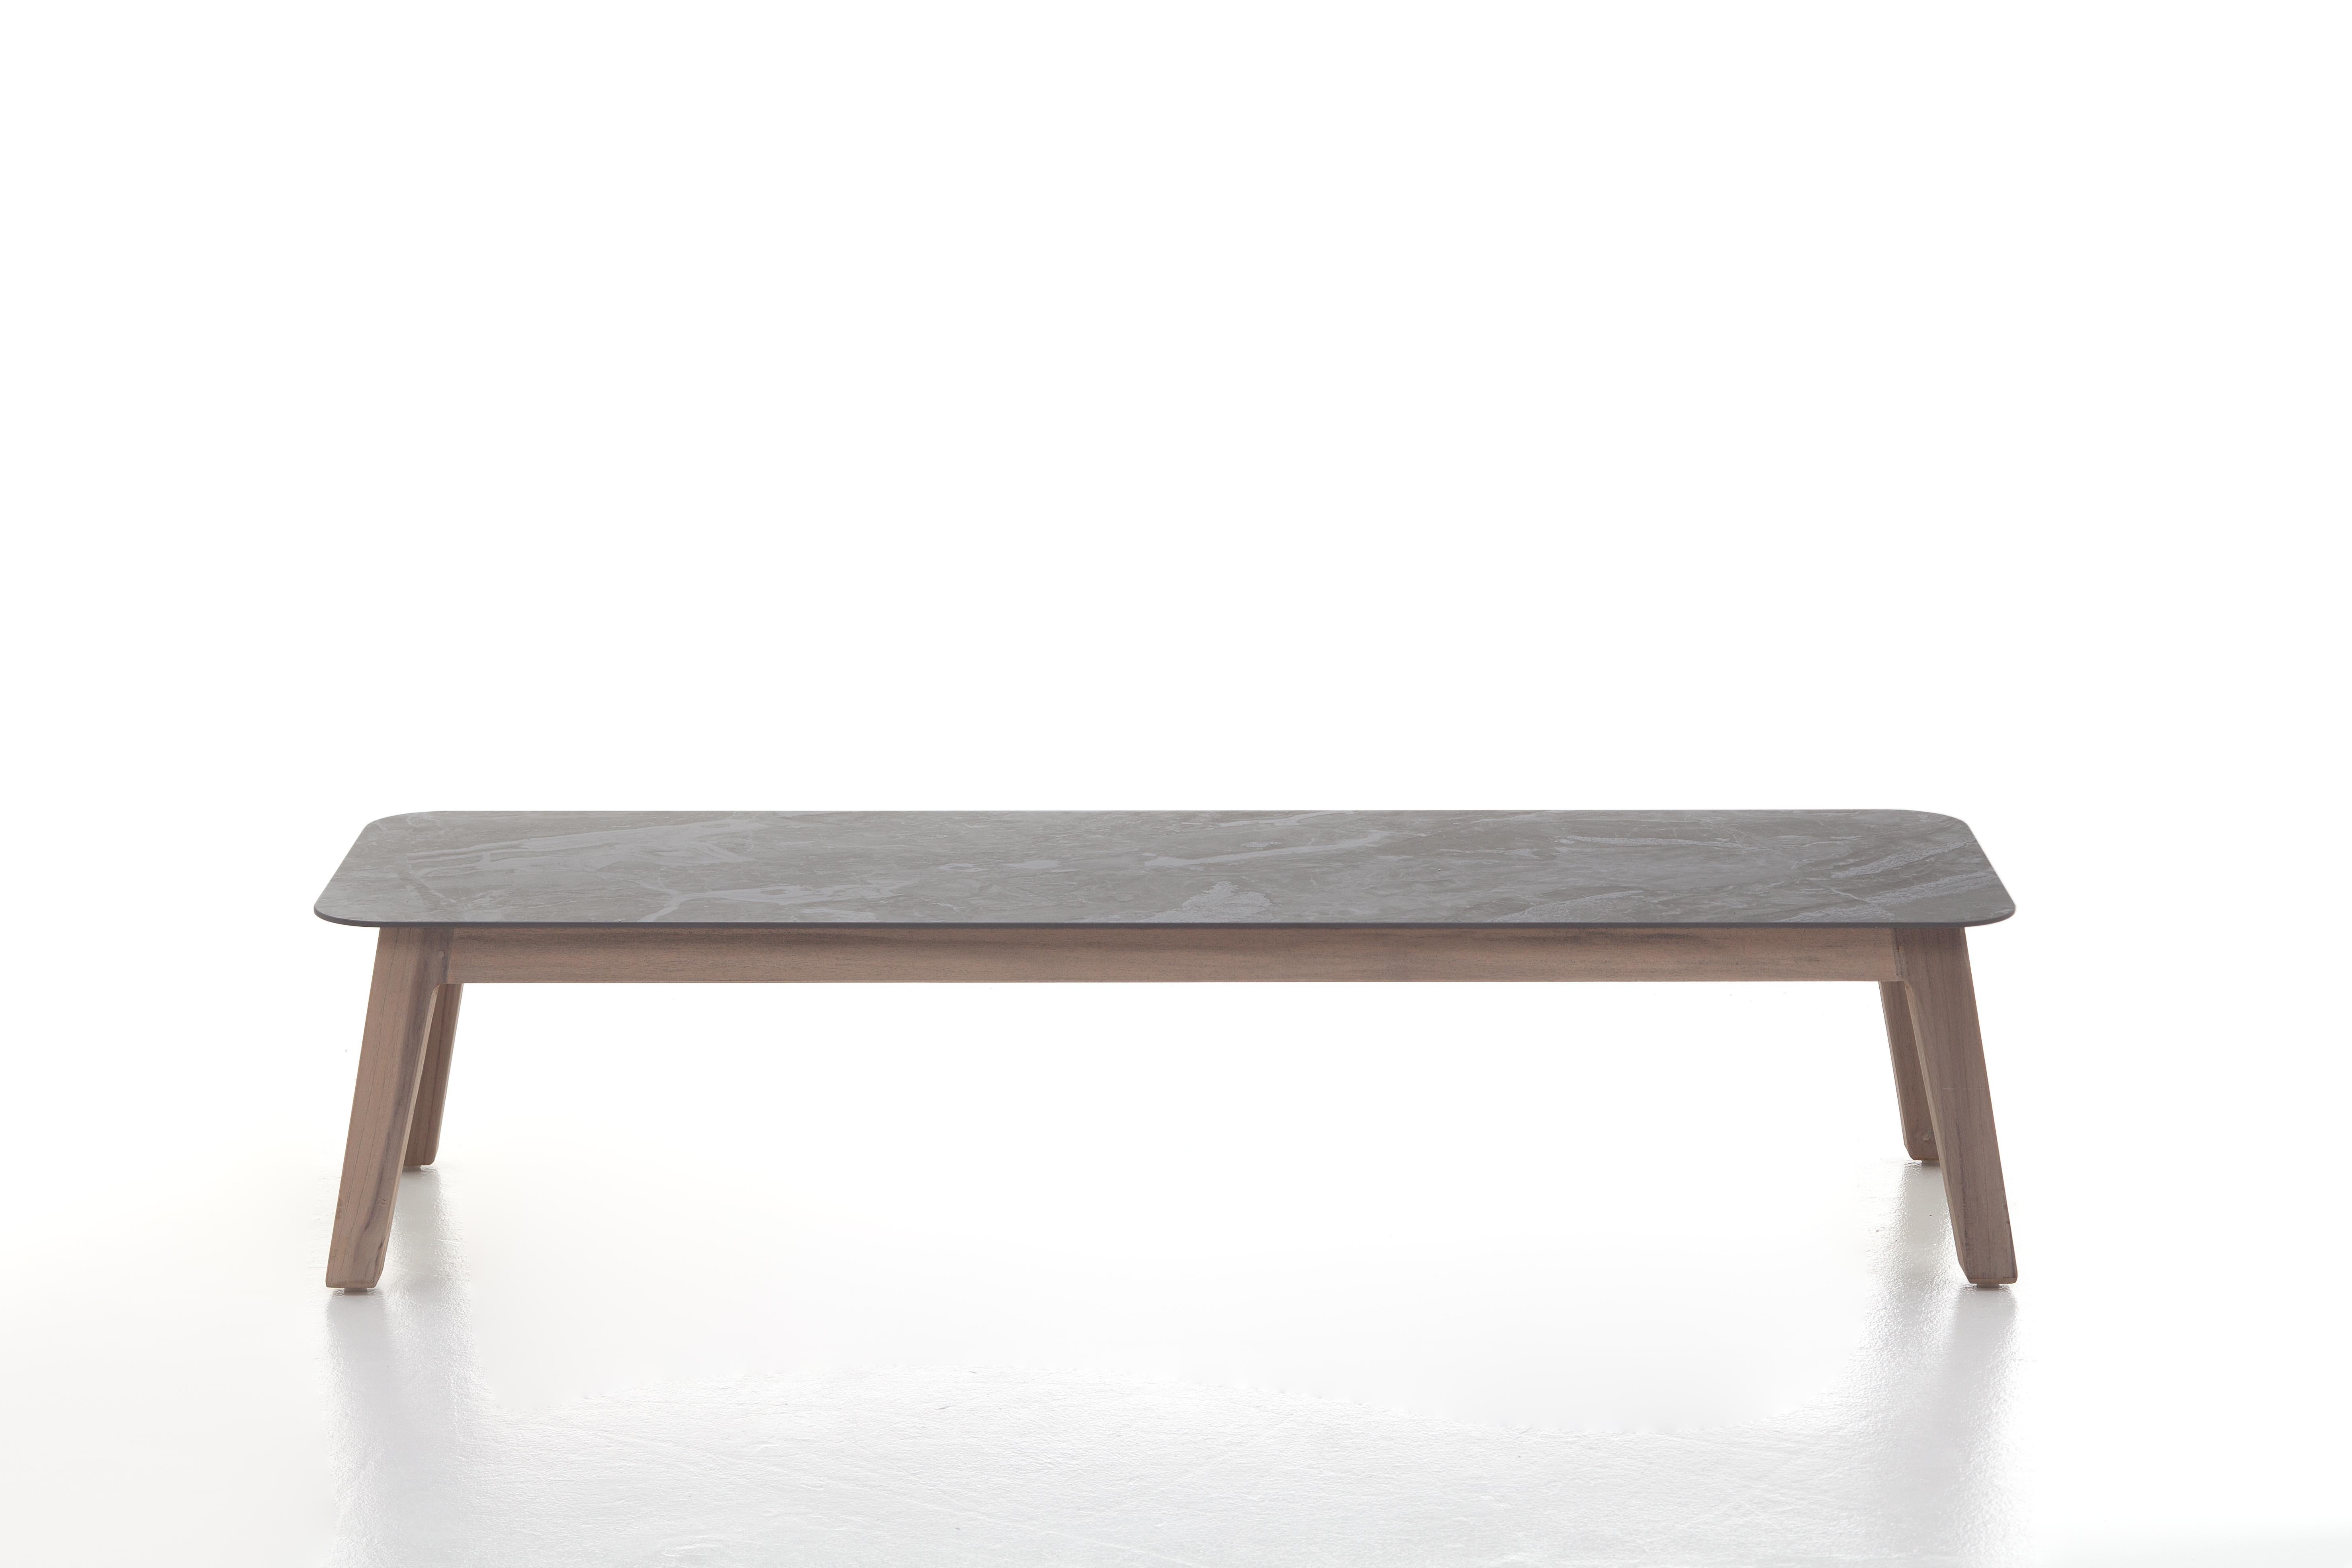 Family of coffee tables available with rectangular or square top, Inout 867/868 express a refined Nordic minimalism. Four-legged coffee tables, they have a base in Washed Teak, one of the finest tropical woods subjected to ageing treatment that